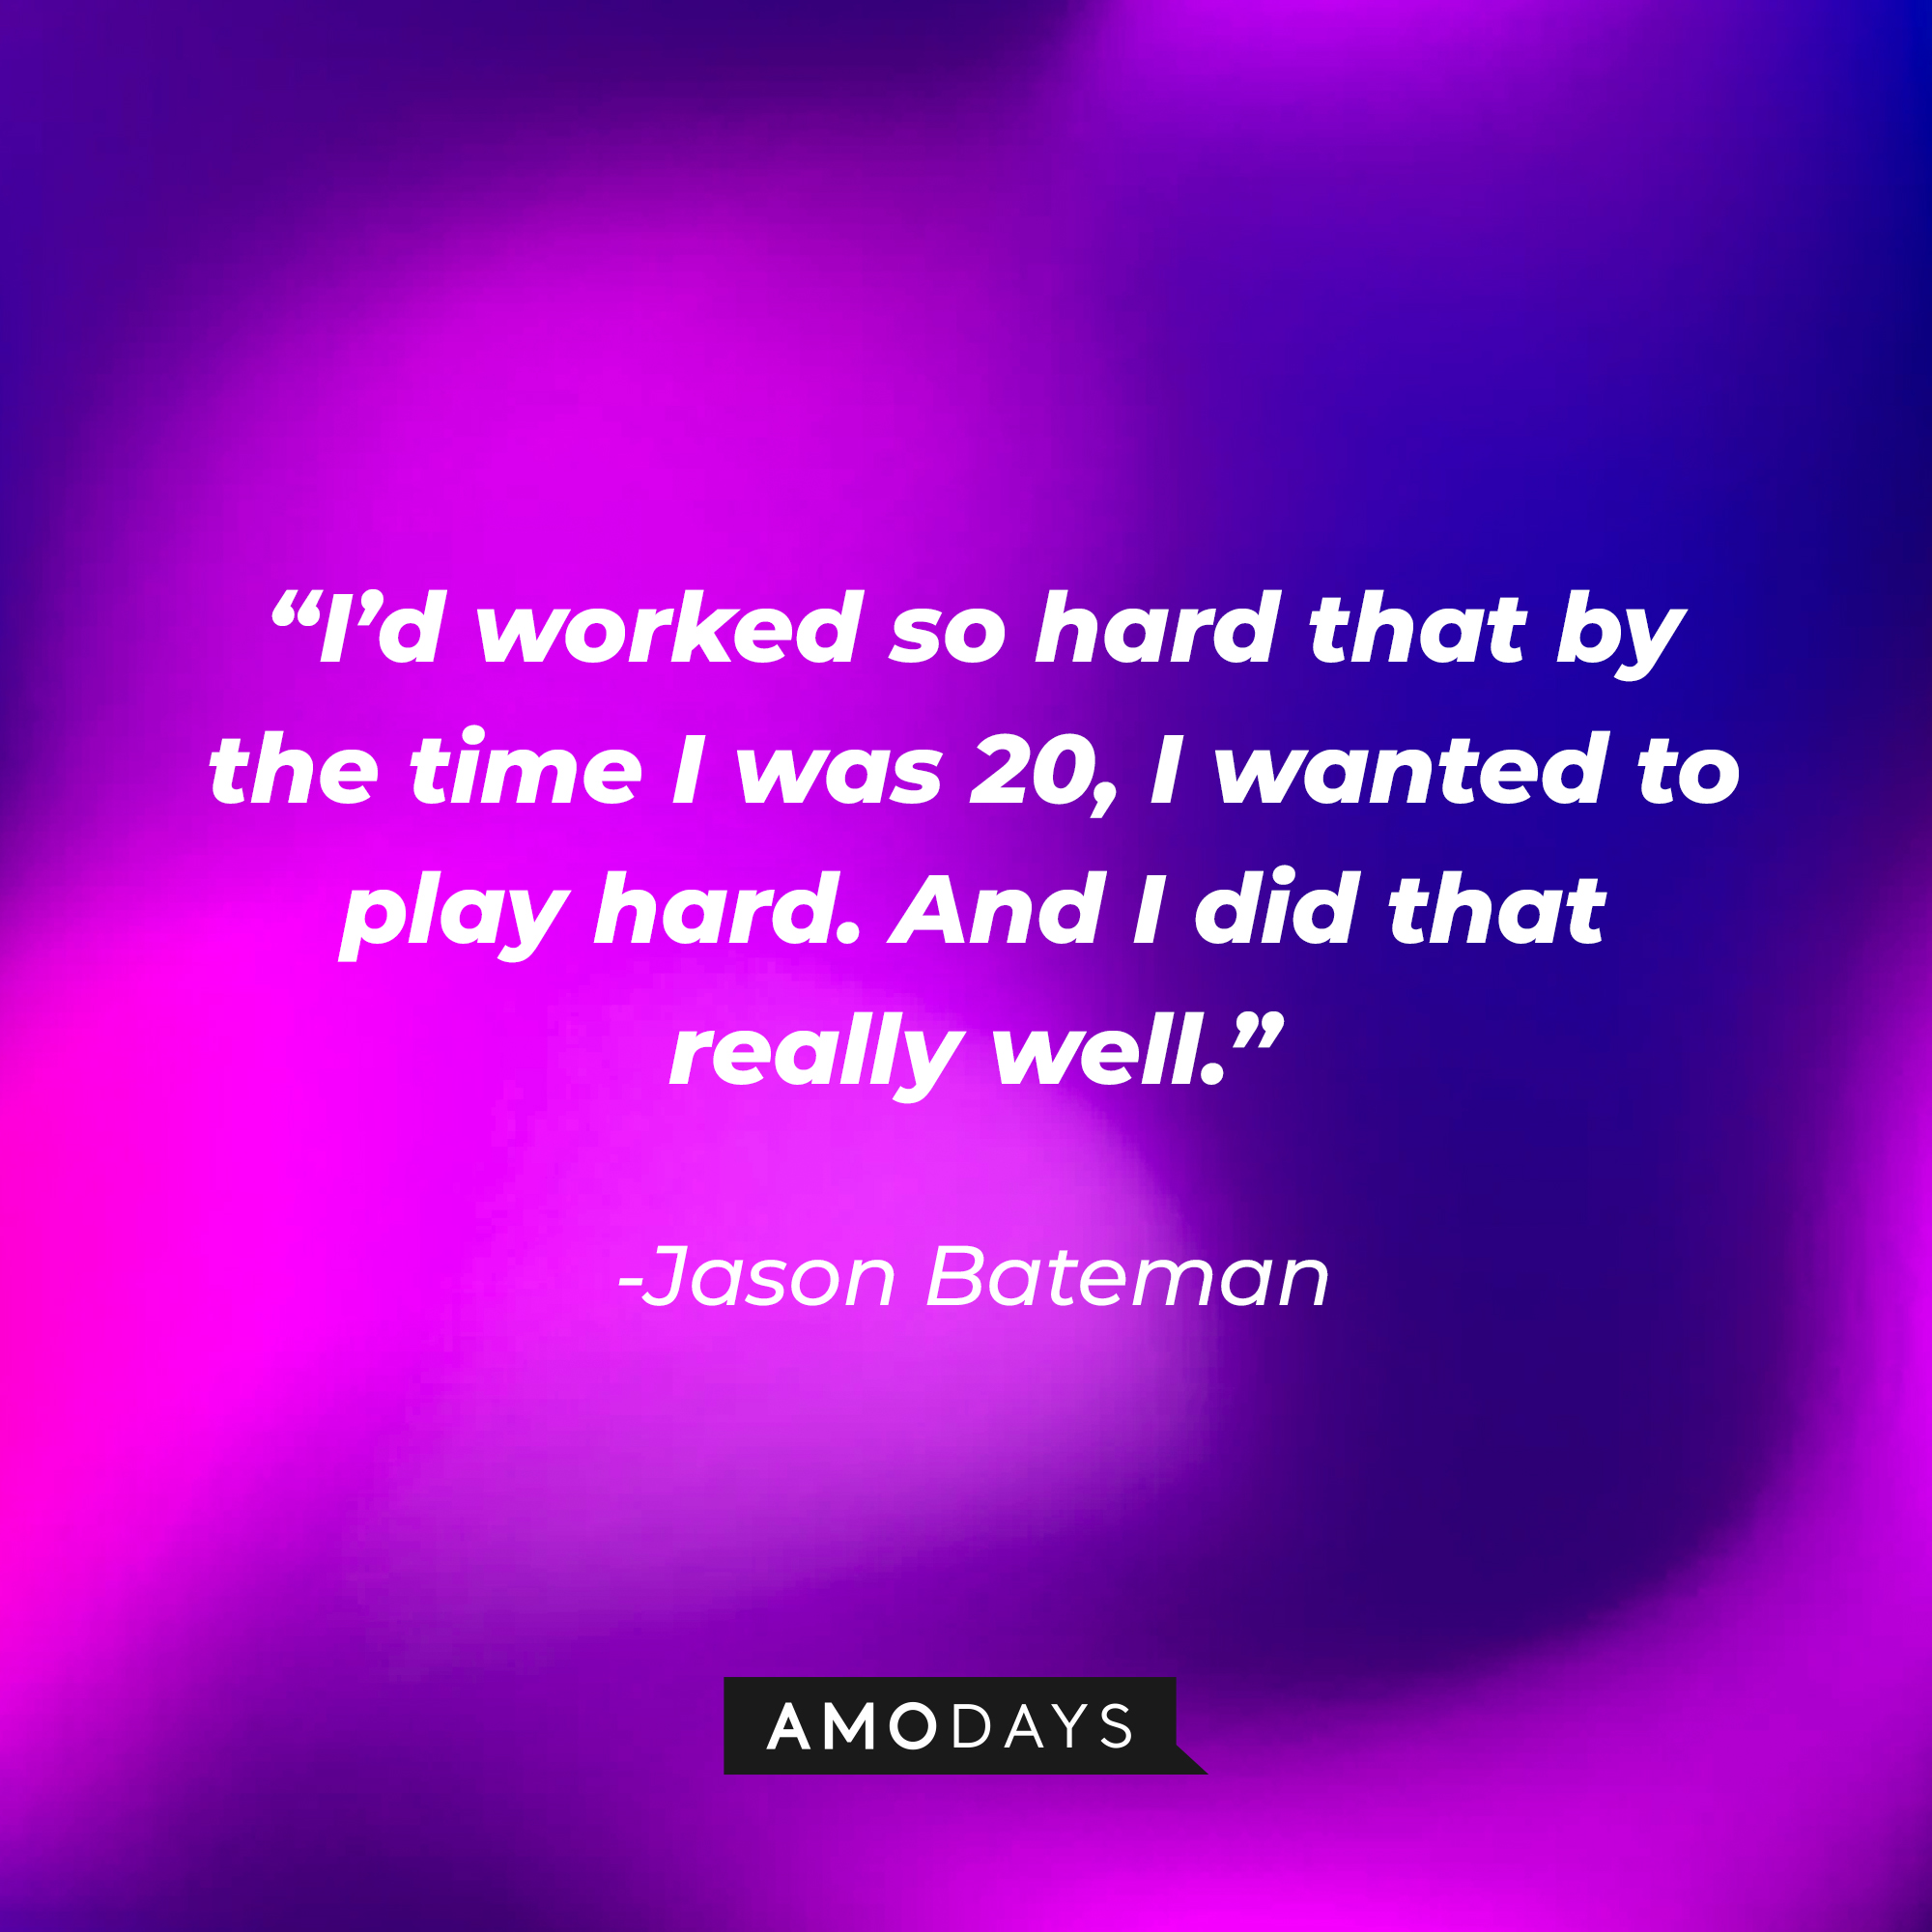 Jason Bateman's quote: “I’d worked so hard that by the time I was 20, I wanted to play hard. And I did that really well.” | Source: Amodays